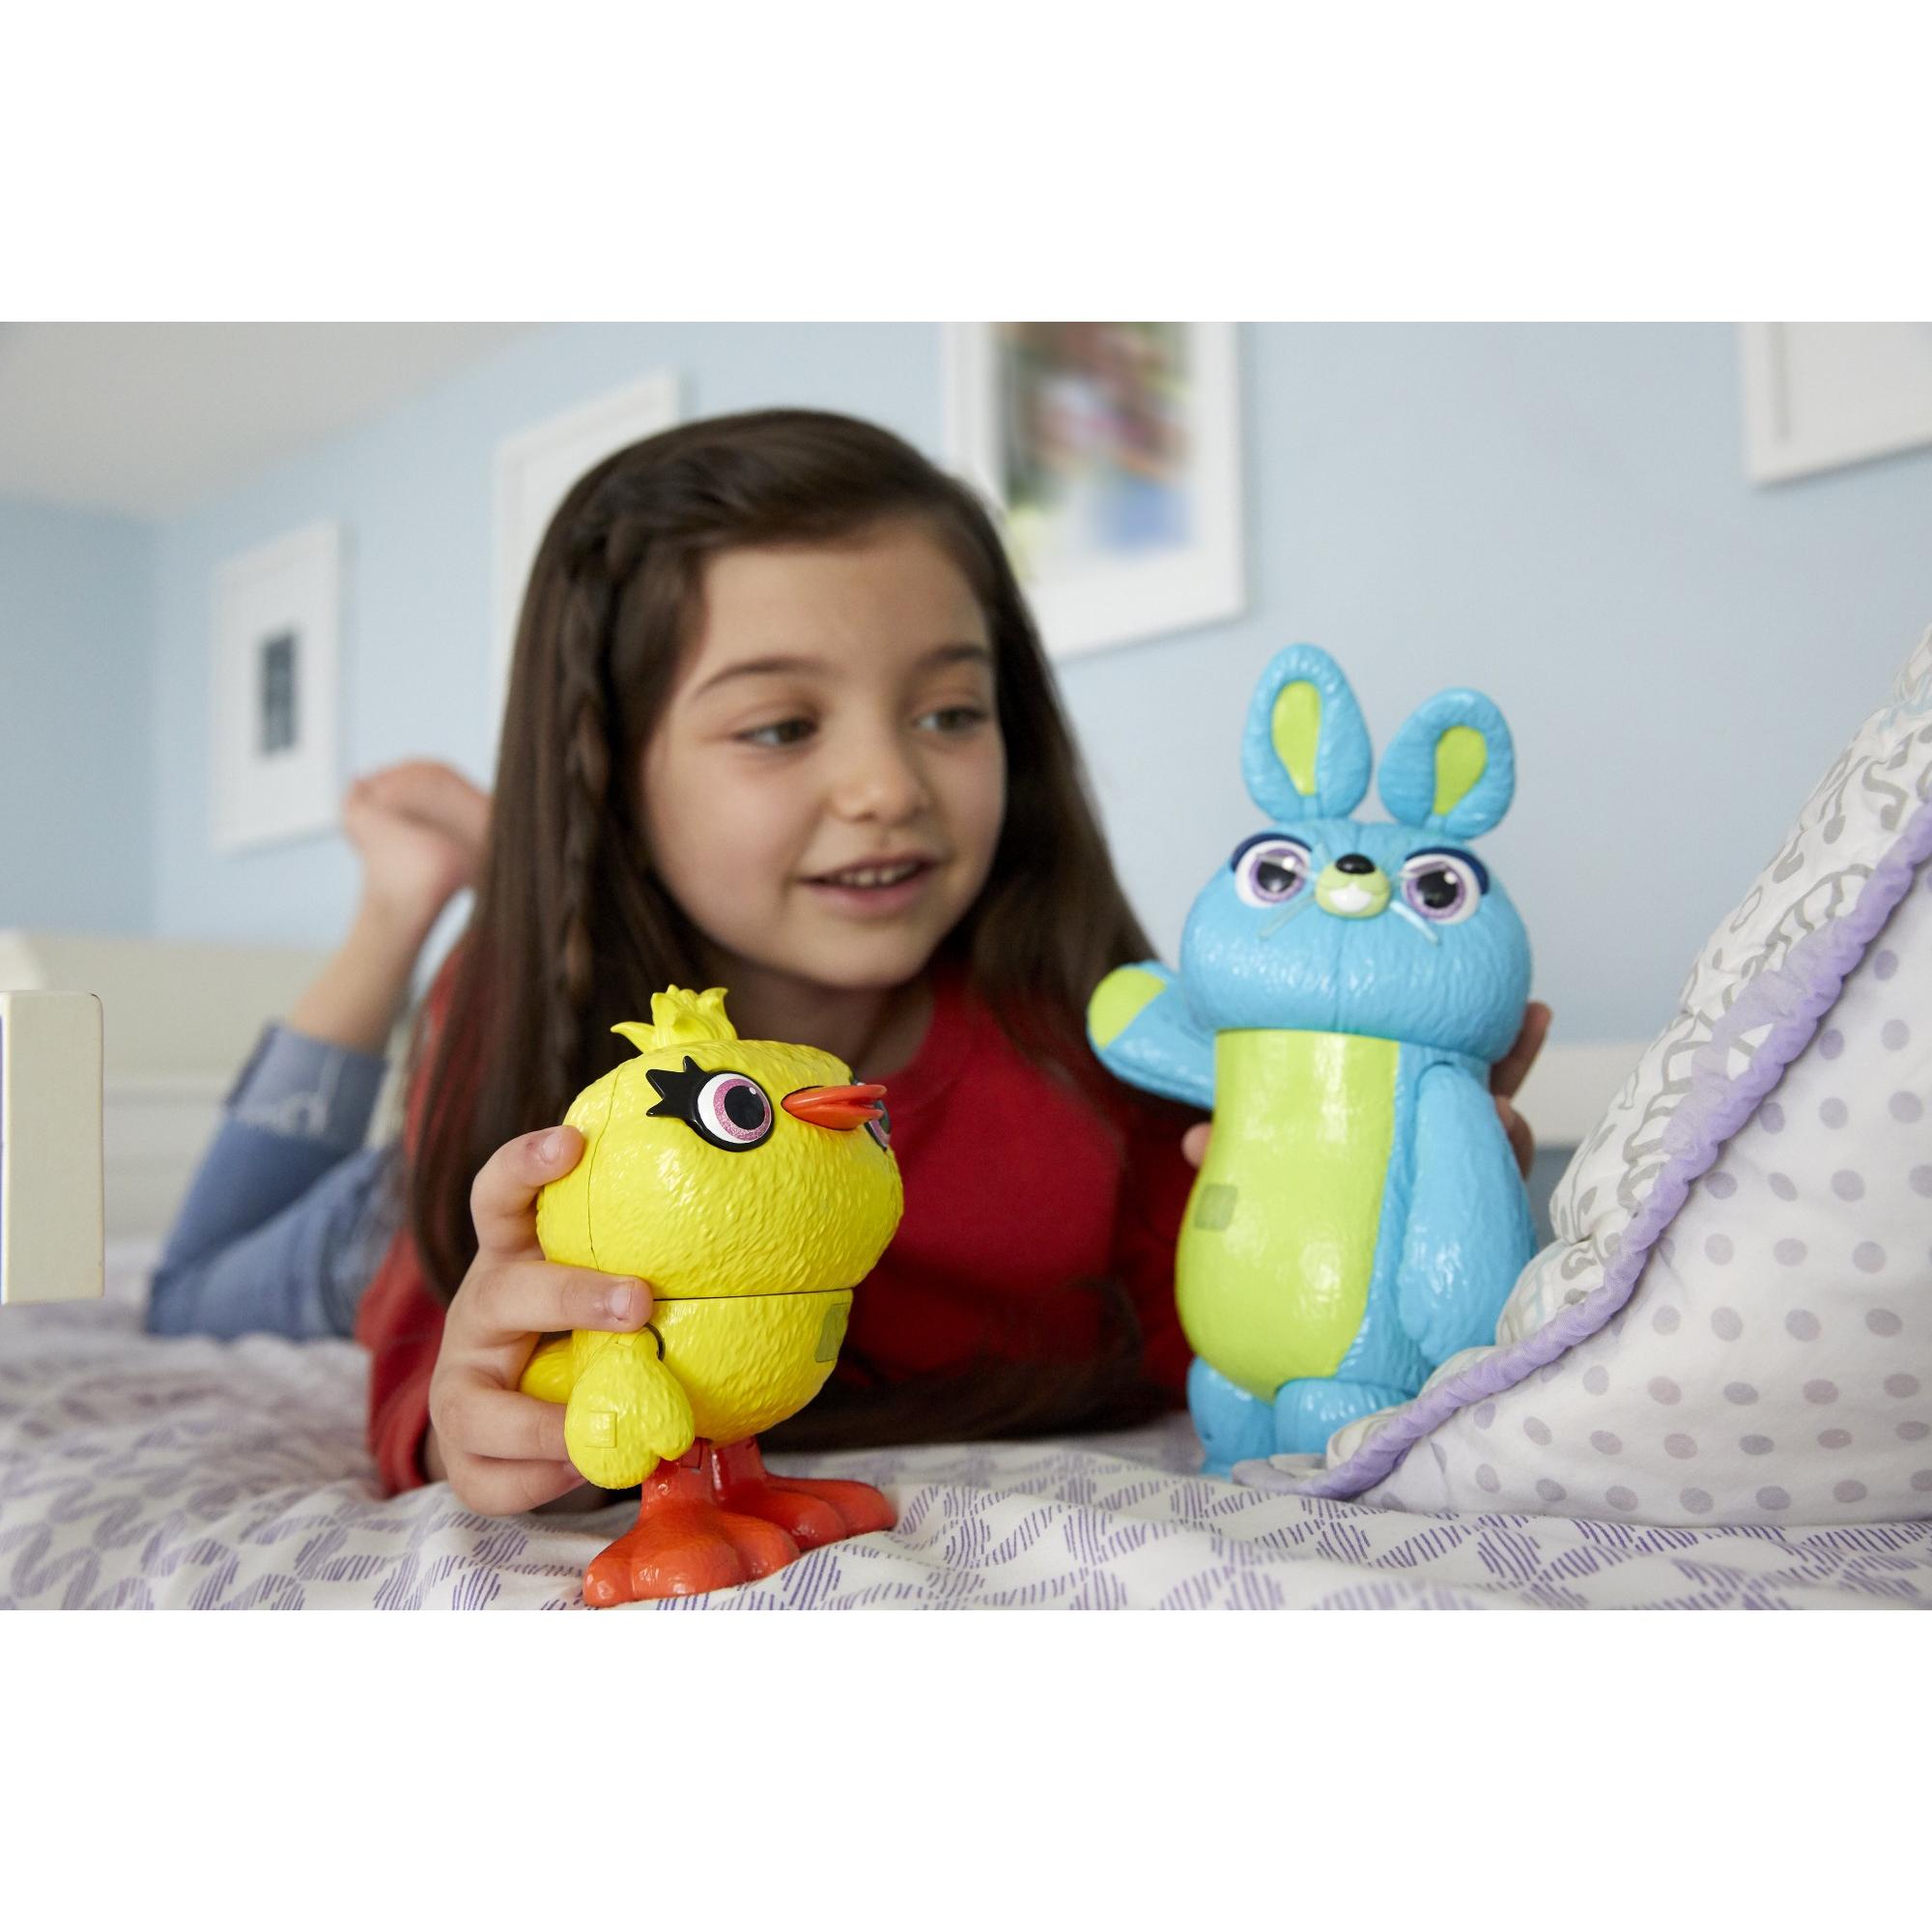 Disney Pixar Toy Story Interactive True Talkers Bunny and Ducky 2-Pack - image 2 of 5